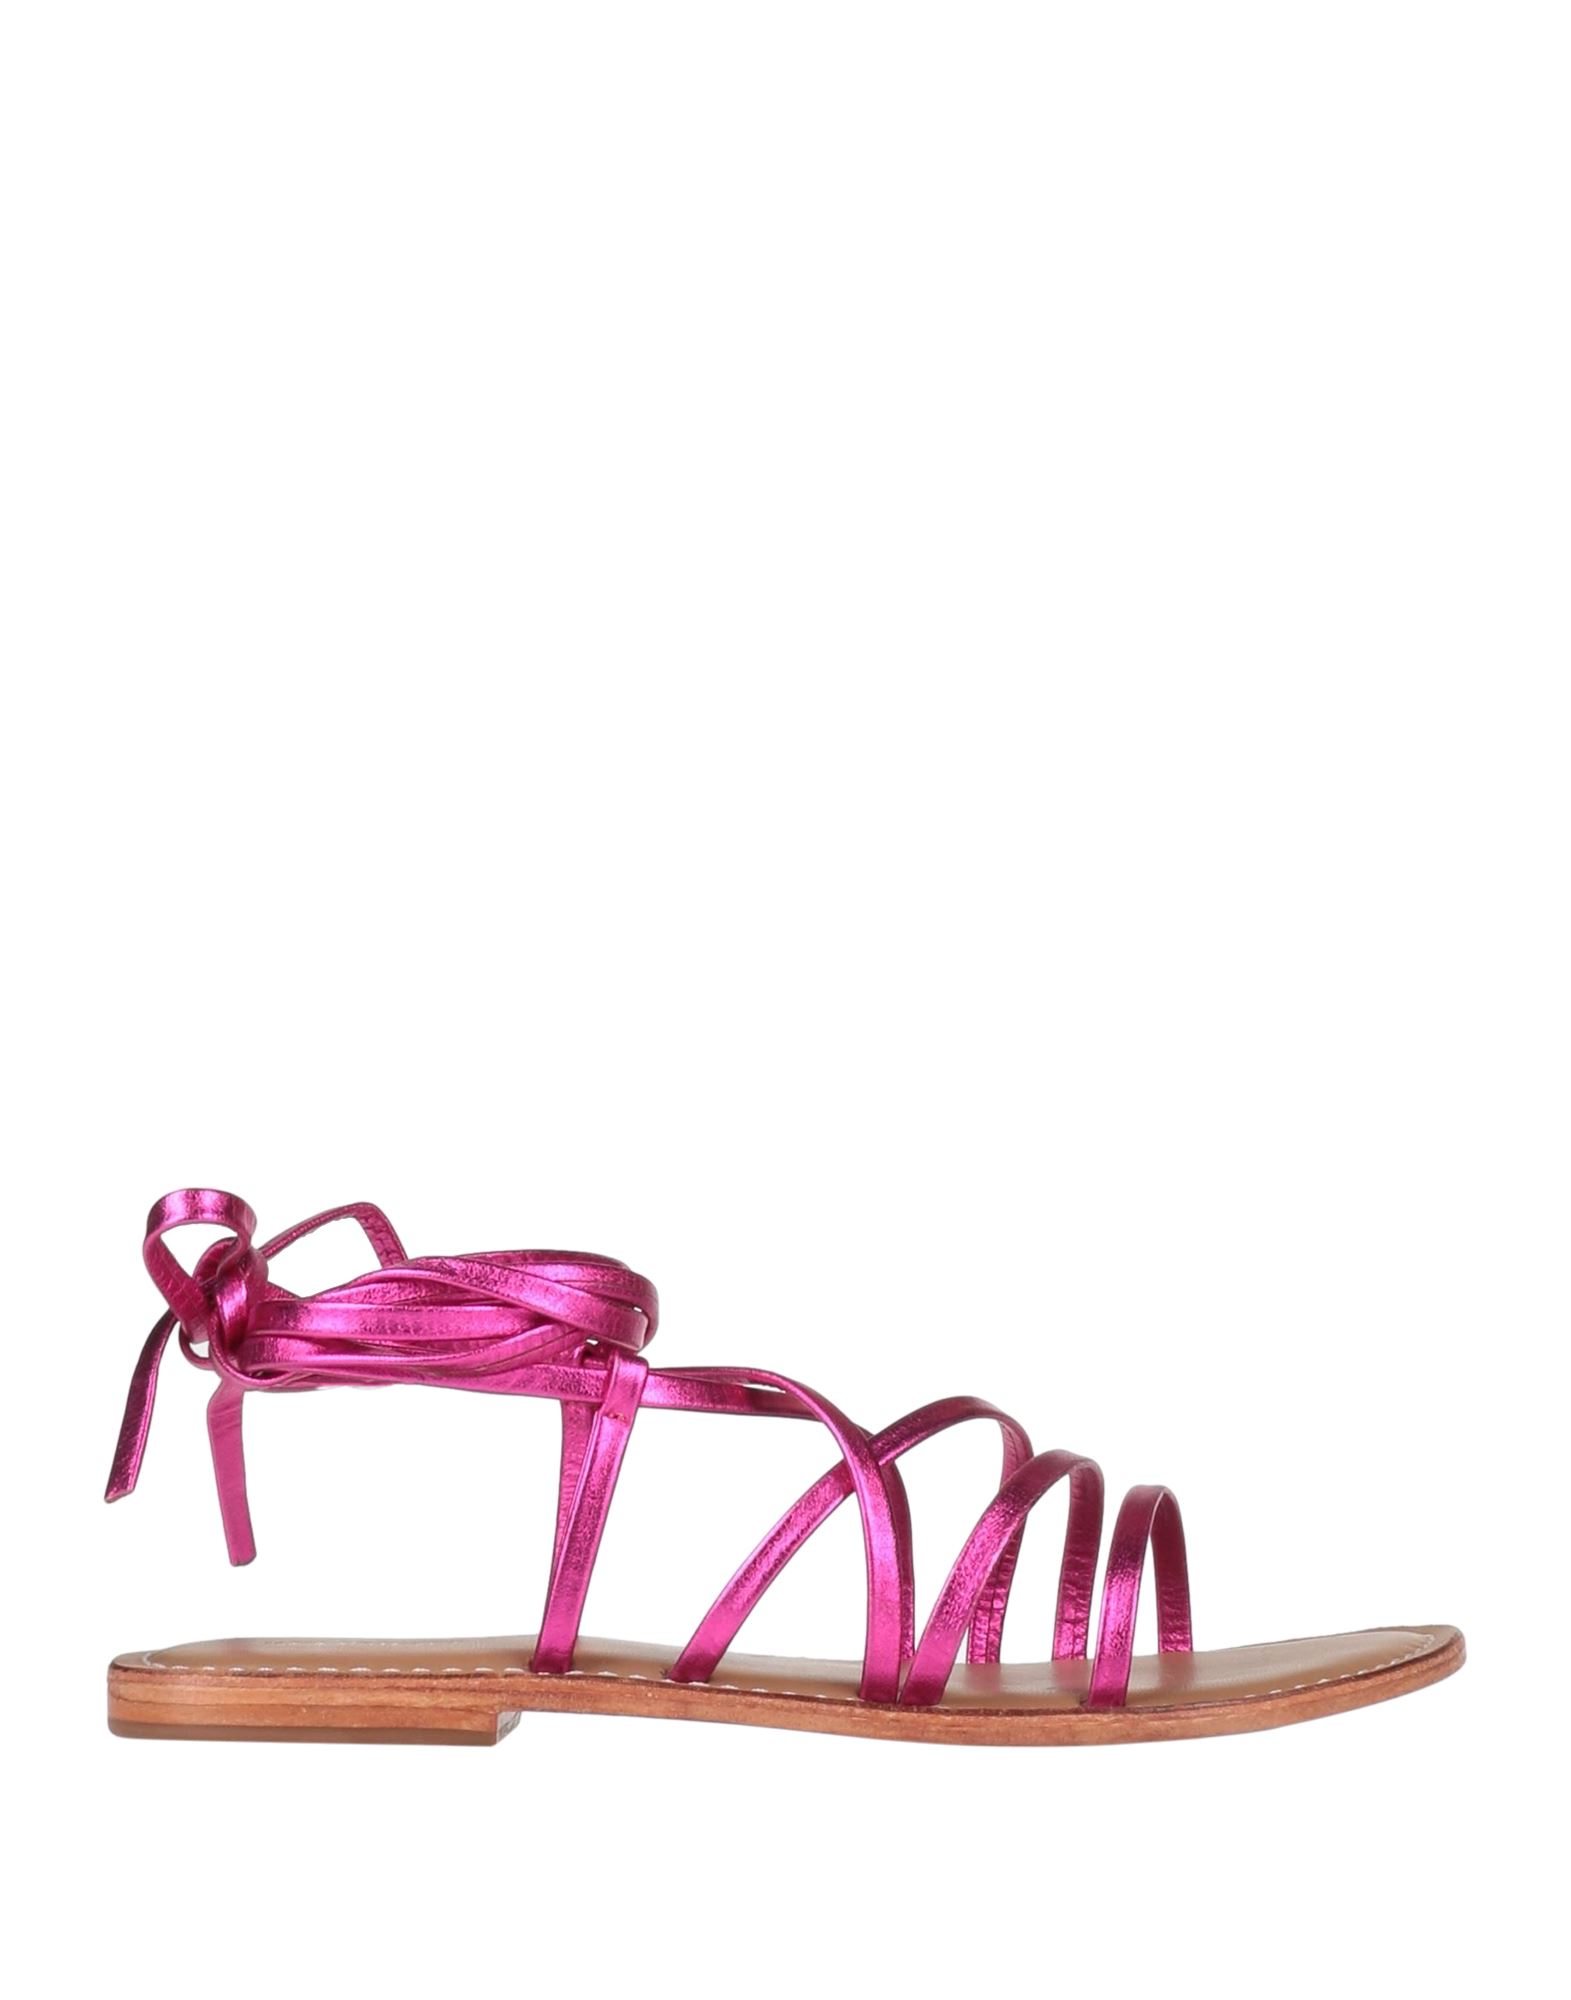 Cb Fusion Sandals In Pink